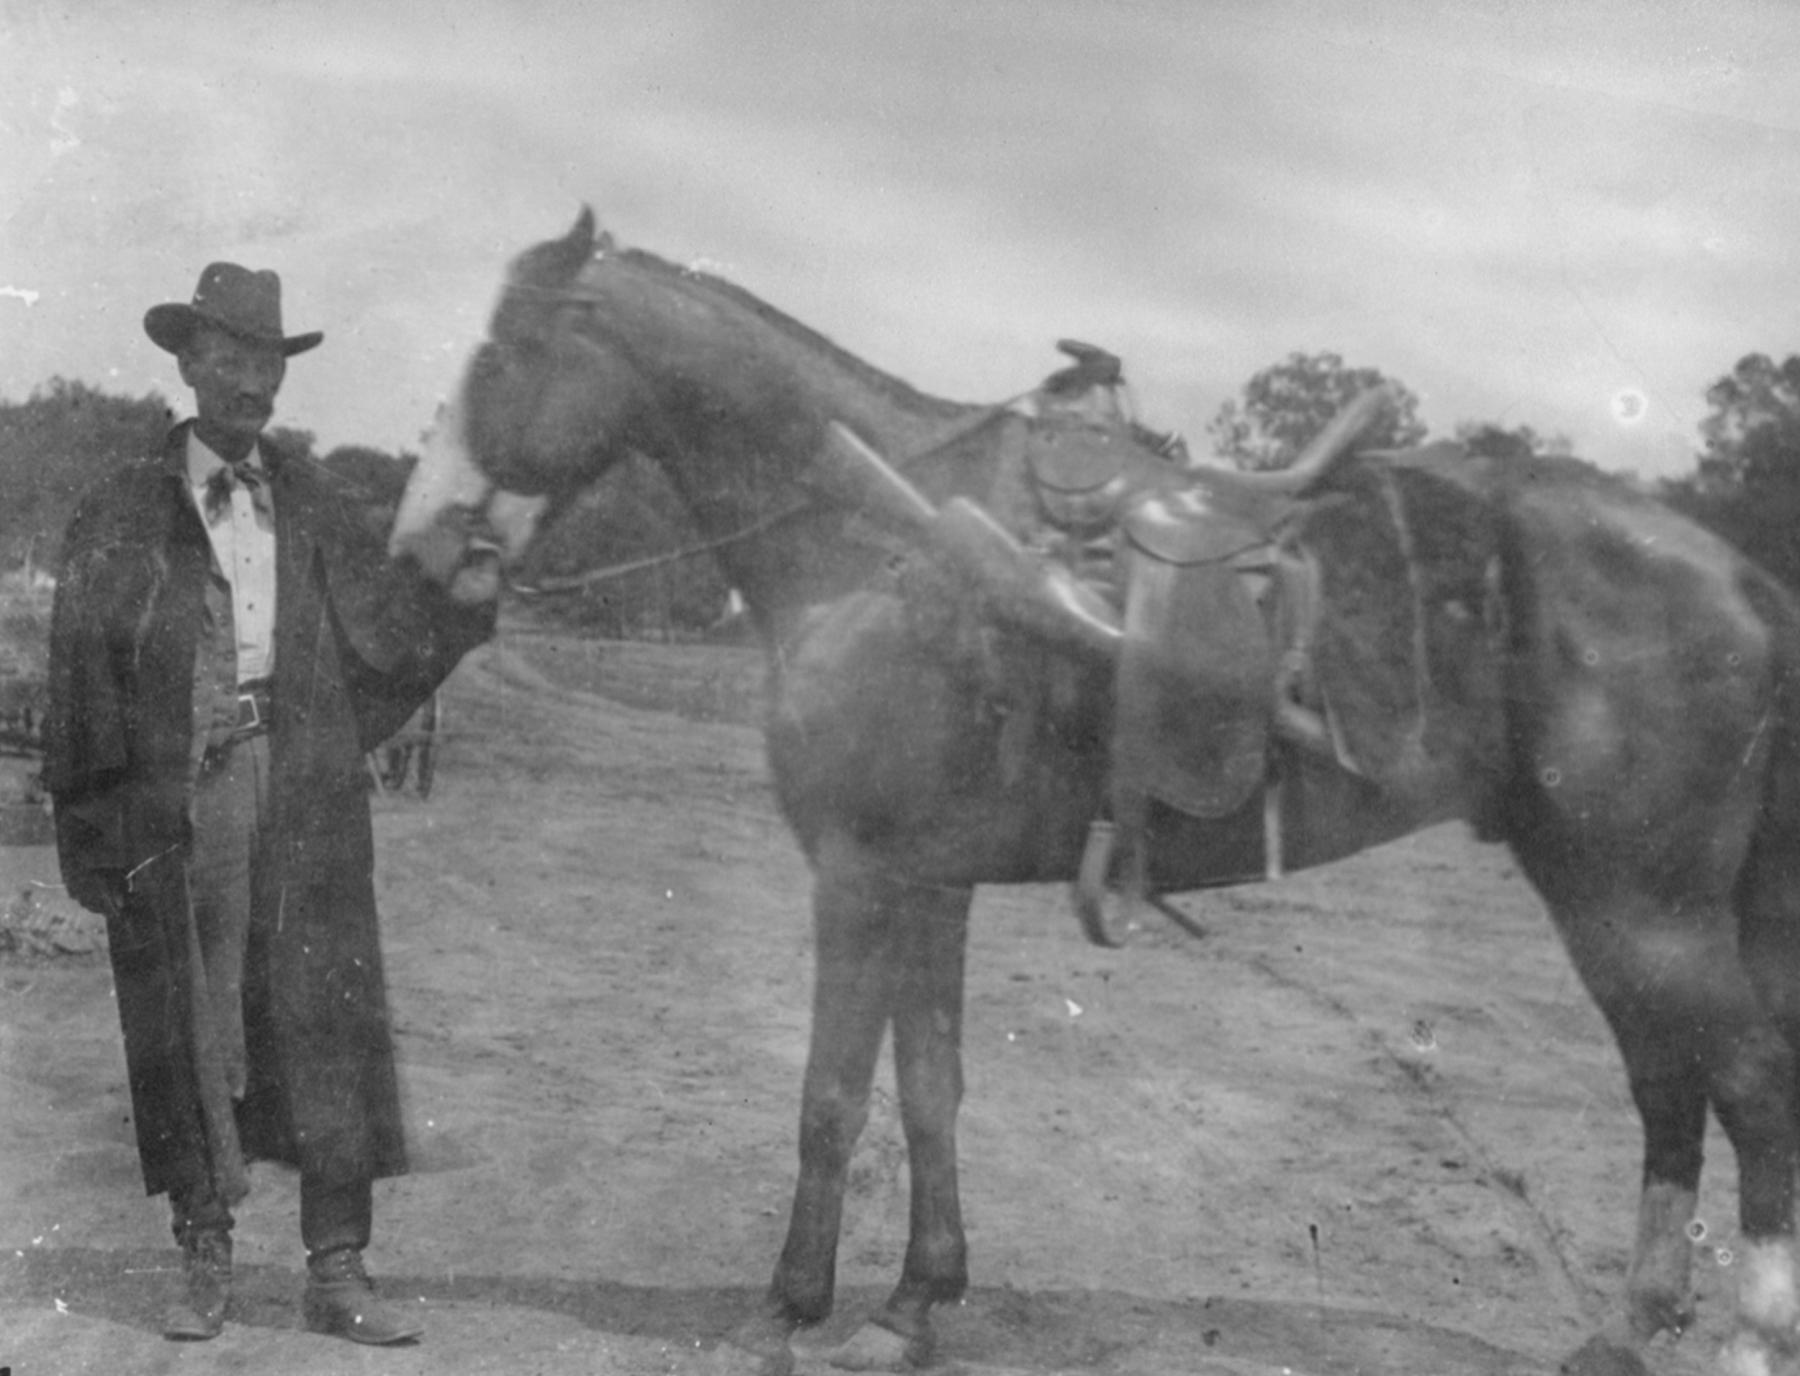 Frank Canton’s neighbor, Charlie Basch, testified that he saw a man on the road near he scene of the Tisdale murder in a coat and hat that looked like Frank Canton’s and riding a horse that looked like Canton’s horse, Fred. But he couldn’t be sure it was Frank Canton. Here, Frank Canton and a horse—perhaps Fred—in an undated photograph. American Heritage Center, University of Wyoming.